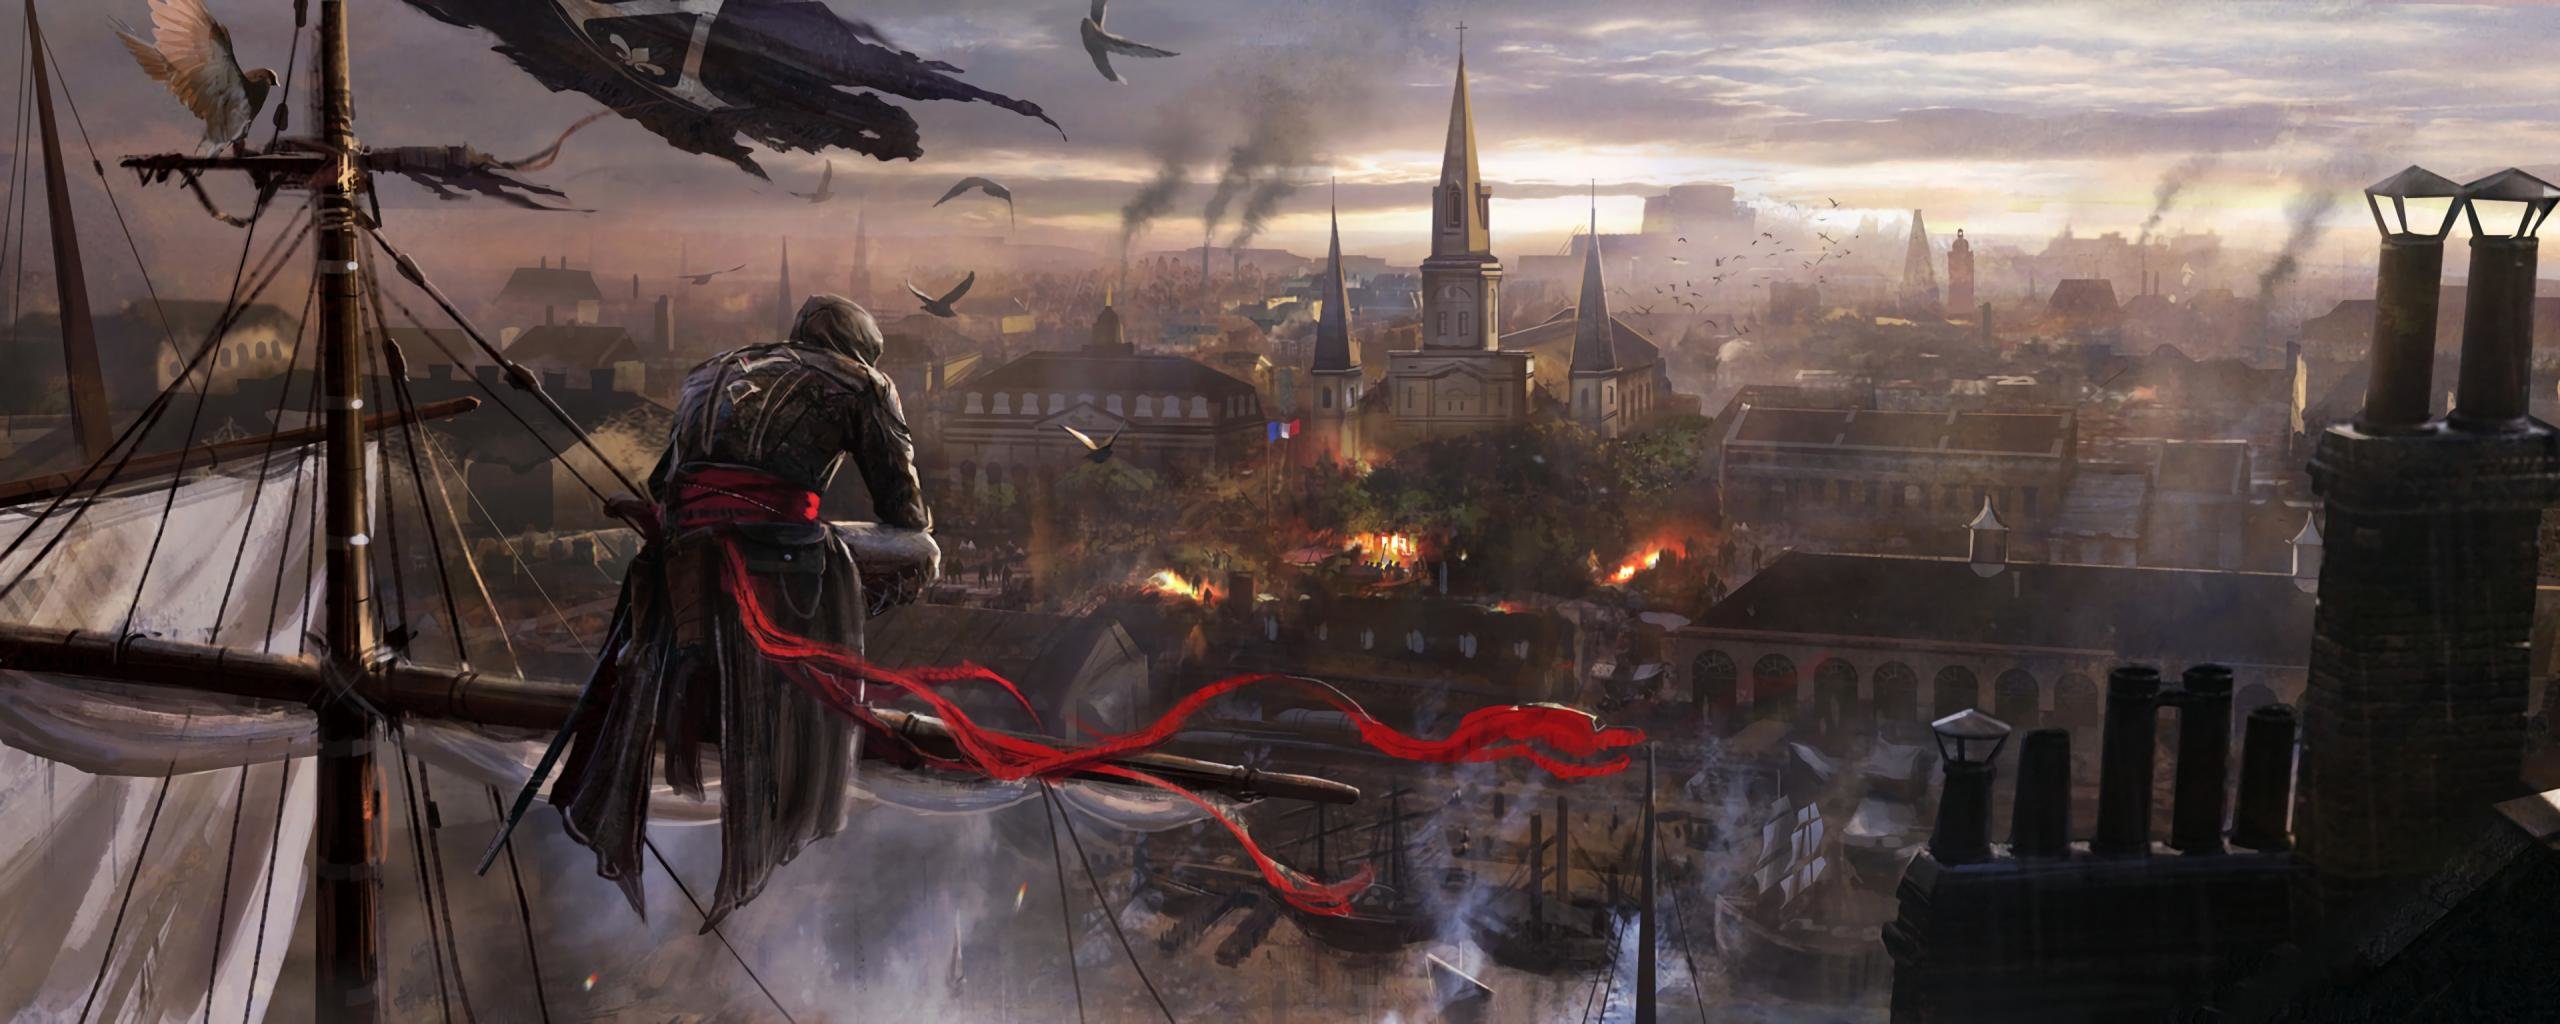 Assassin S Creed Wallpaper - Assassin's Creed Dual Monitor , HD Wallpaper & Backgrounds